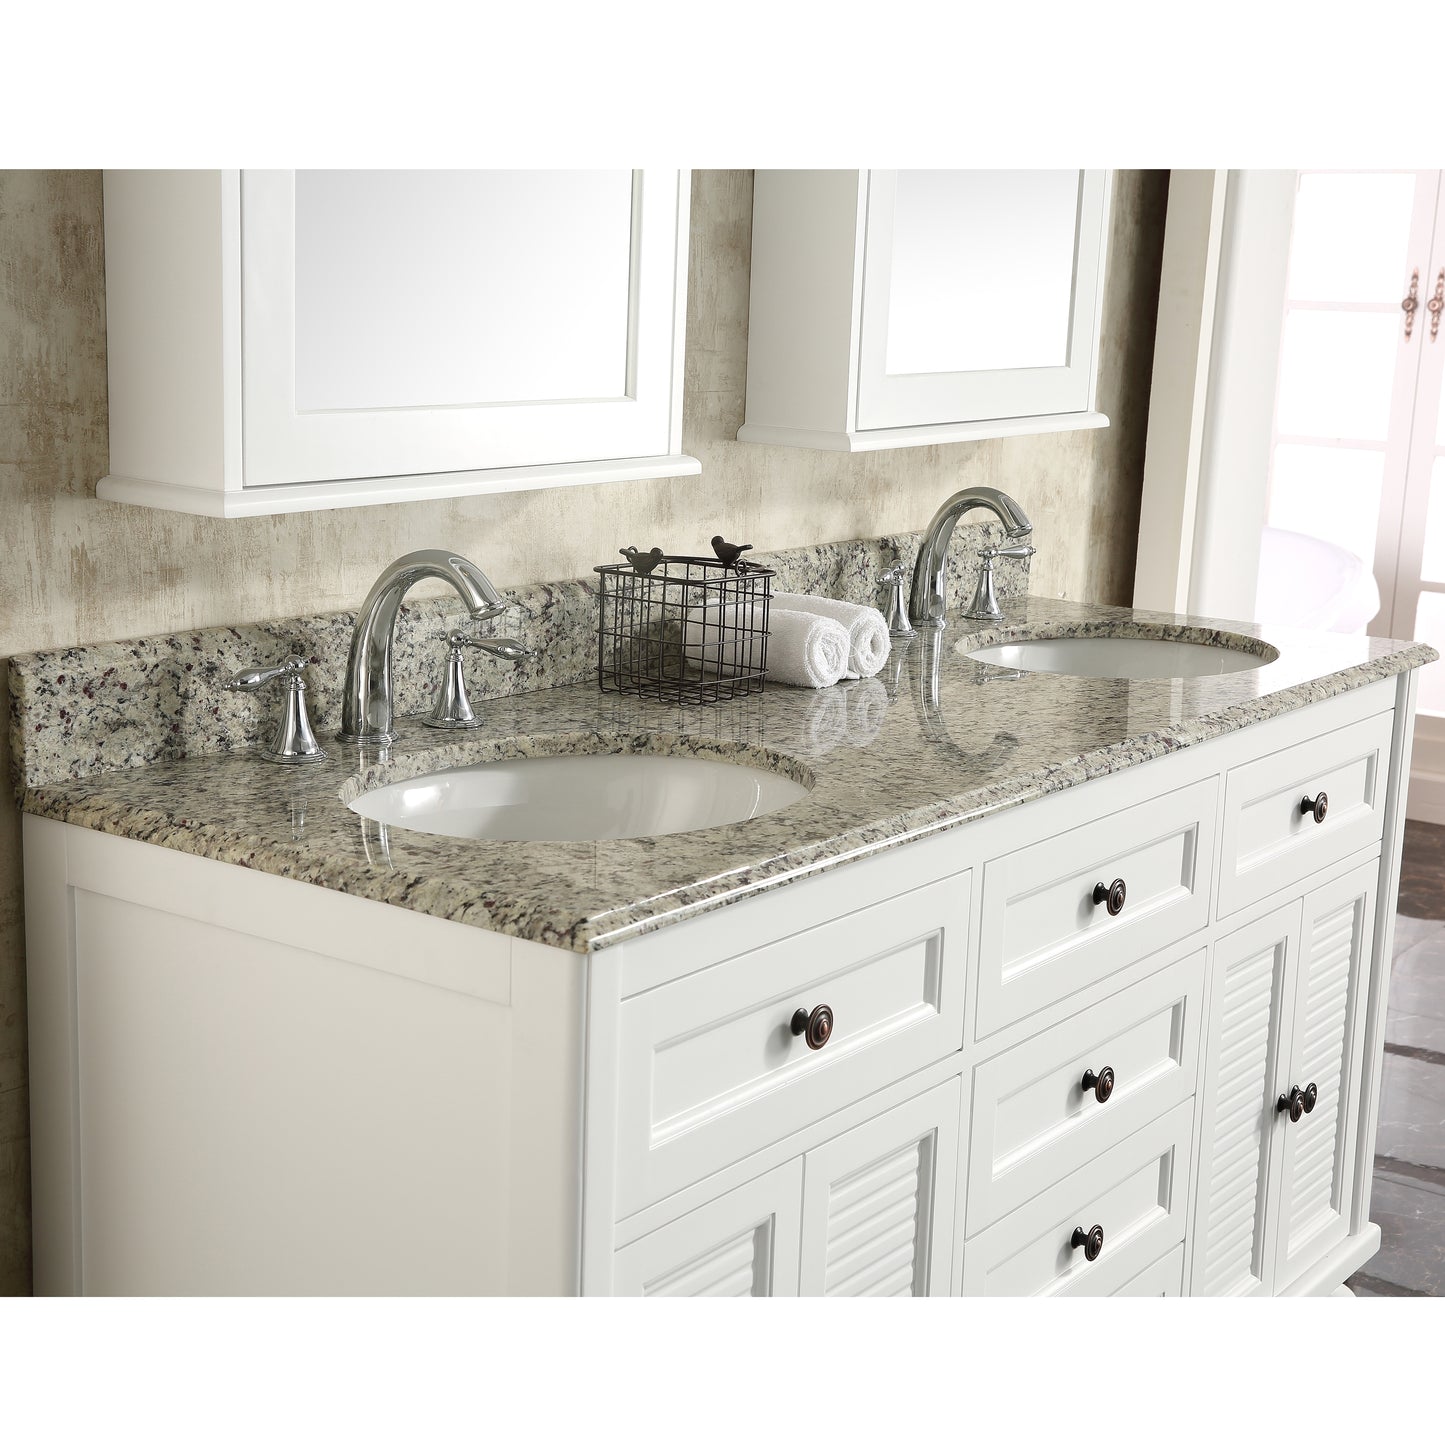 60" Width Double Bathroom Vanity in White with Granite Countertop and Mirror Cabinets